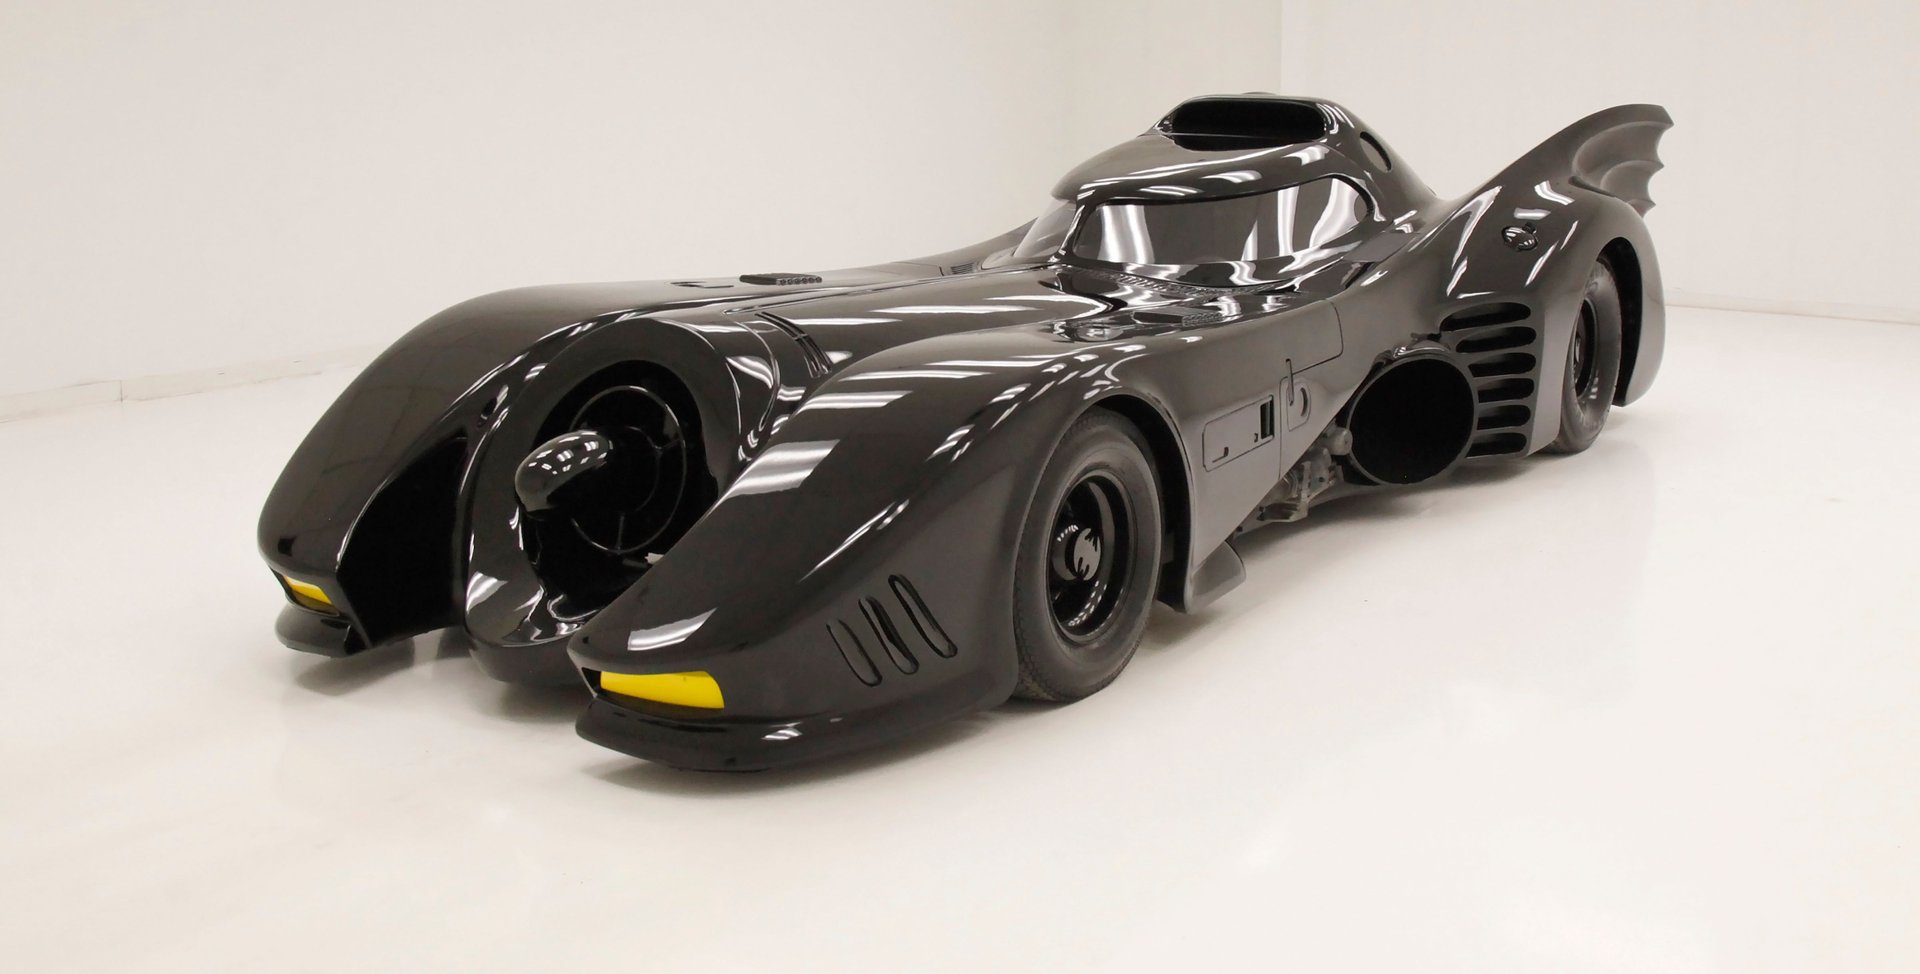 1669743217 This 1989 Batmobile for sale is a genuine movie prop